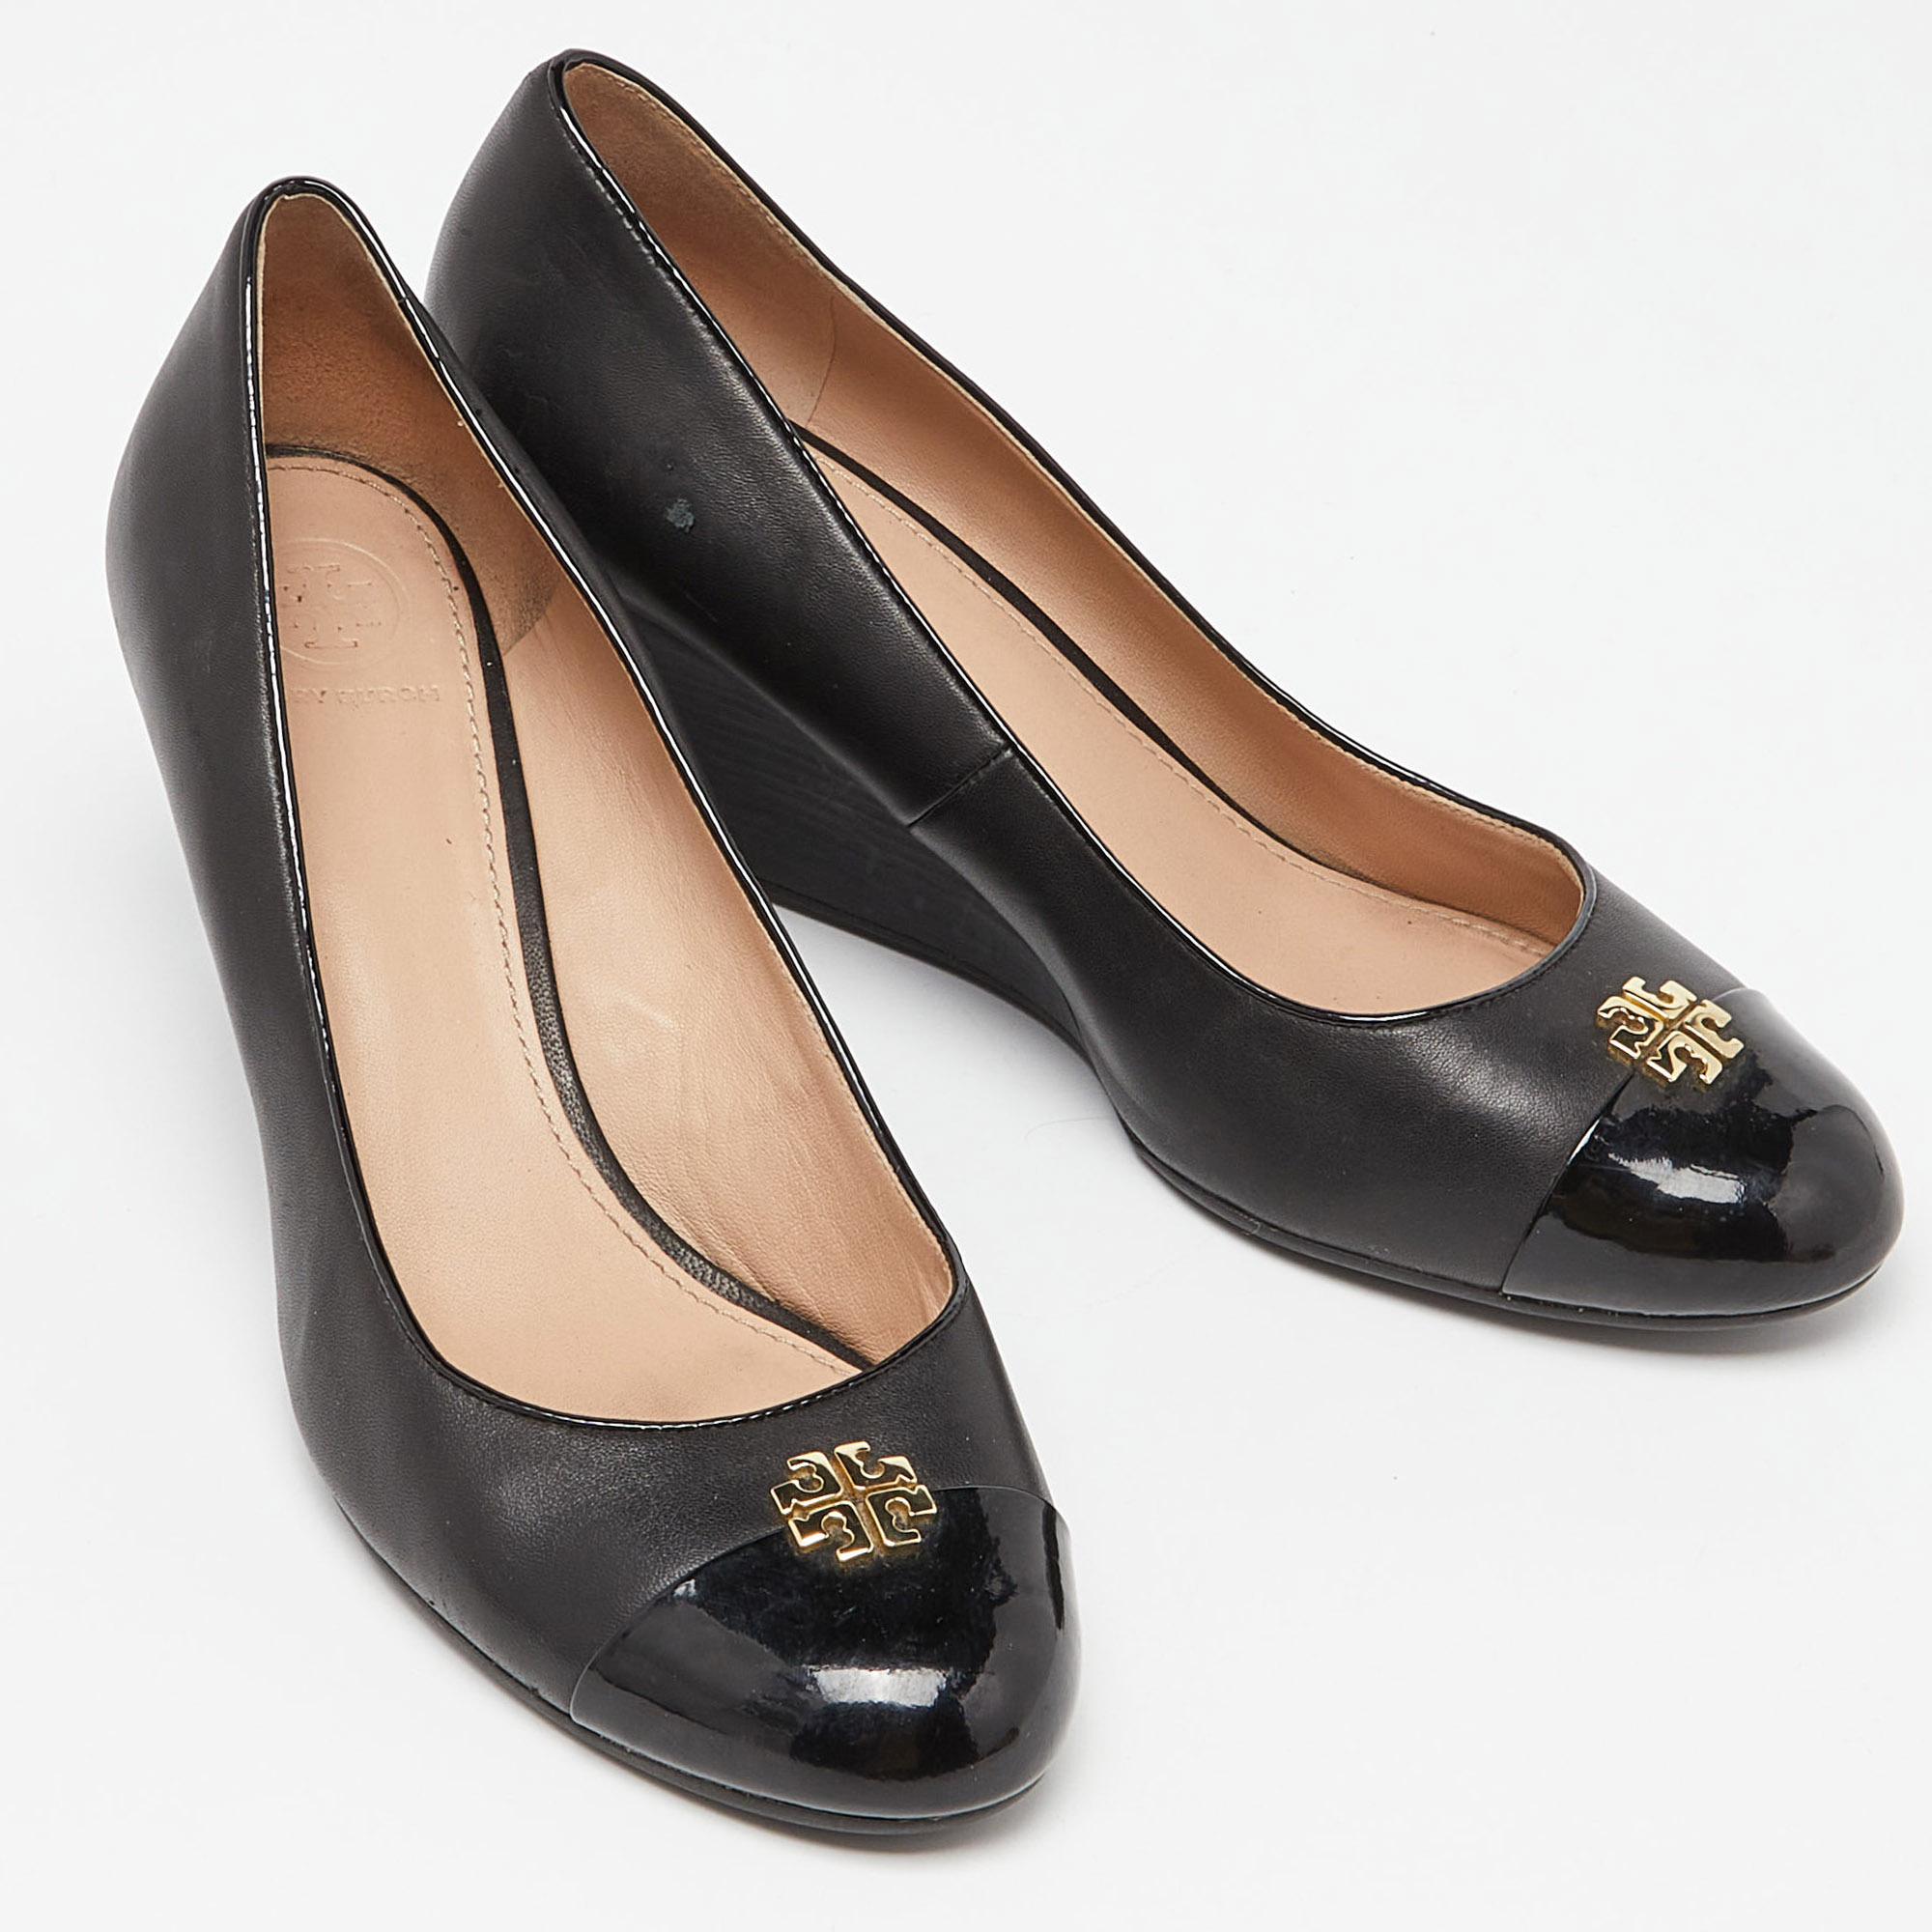 Tory Burch Black Leather And Patent Cap Toe Wedge Pumps Size 40